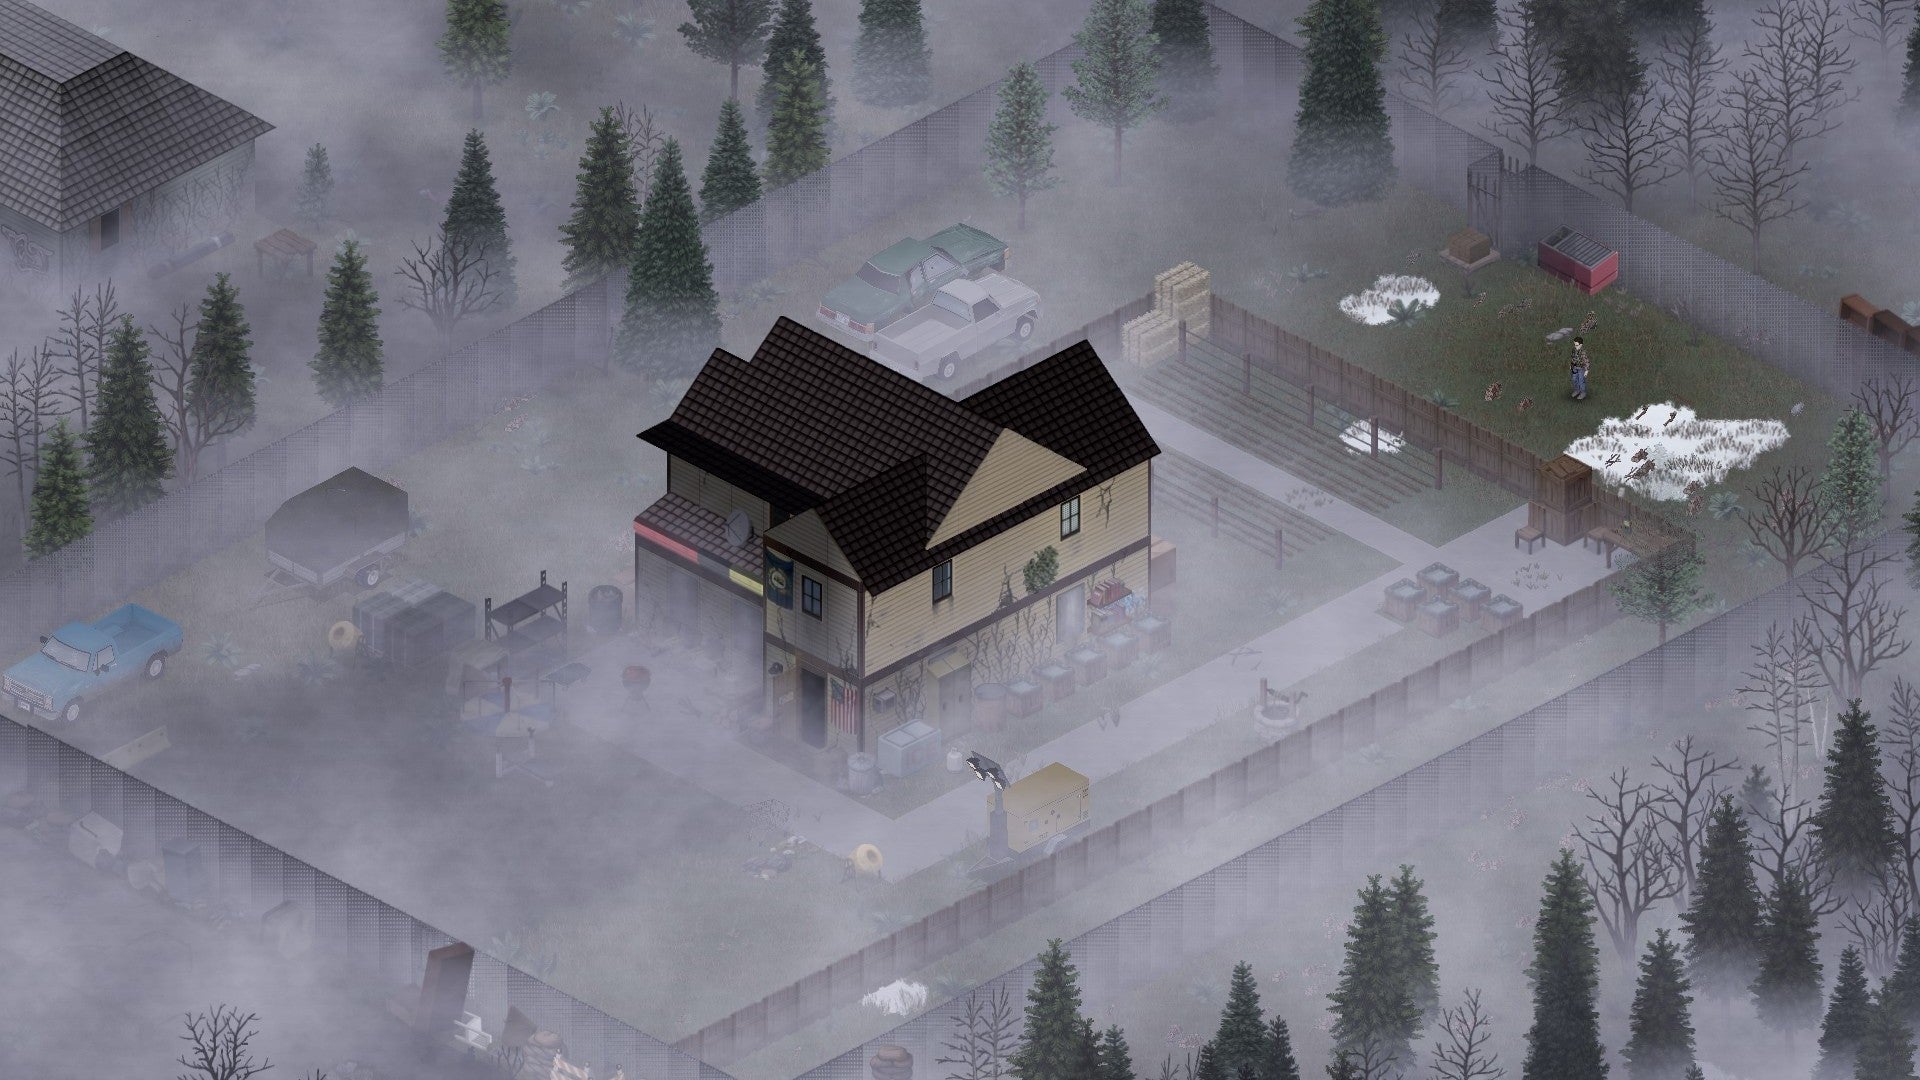 Project Zomboid house surrounded by fences and other fortifications, covered in a blanket of fog